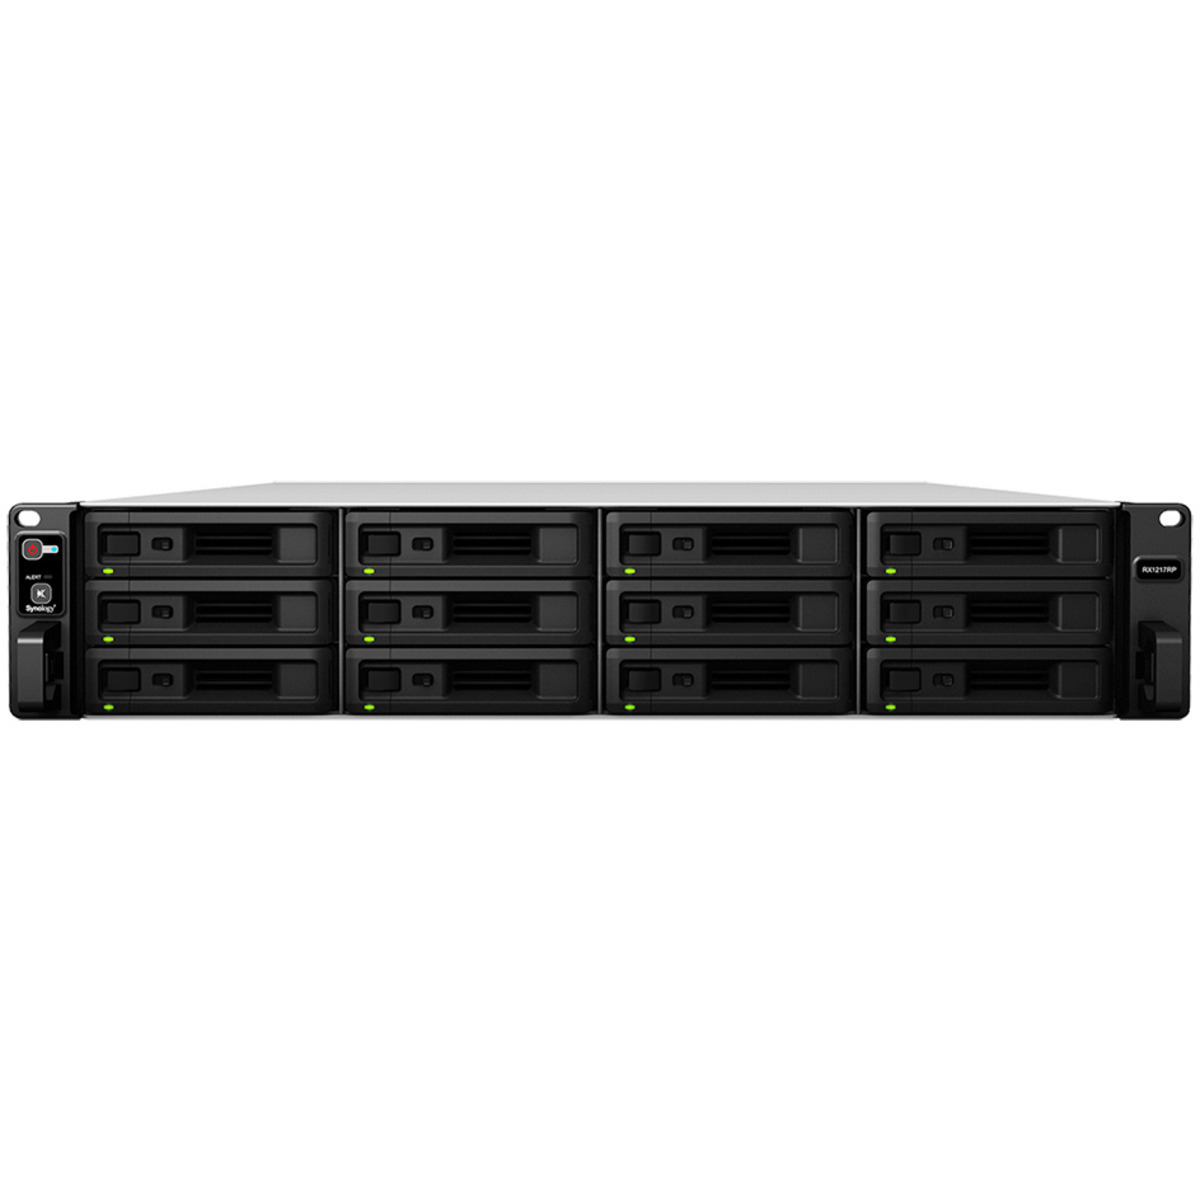 buy Synology RX1217RP RackMount Expansion Enclosure Burn-In Tested Configurations - nas headquarters buy network attached storage server device das new raid-5 free shipping usa christmas new year holiday sale RX1217RP